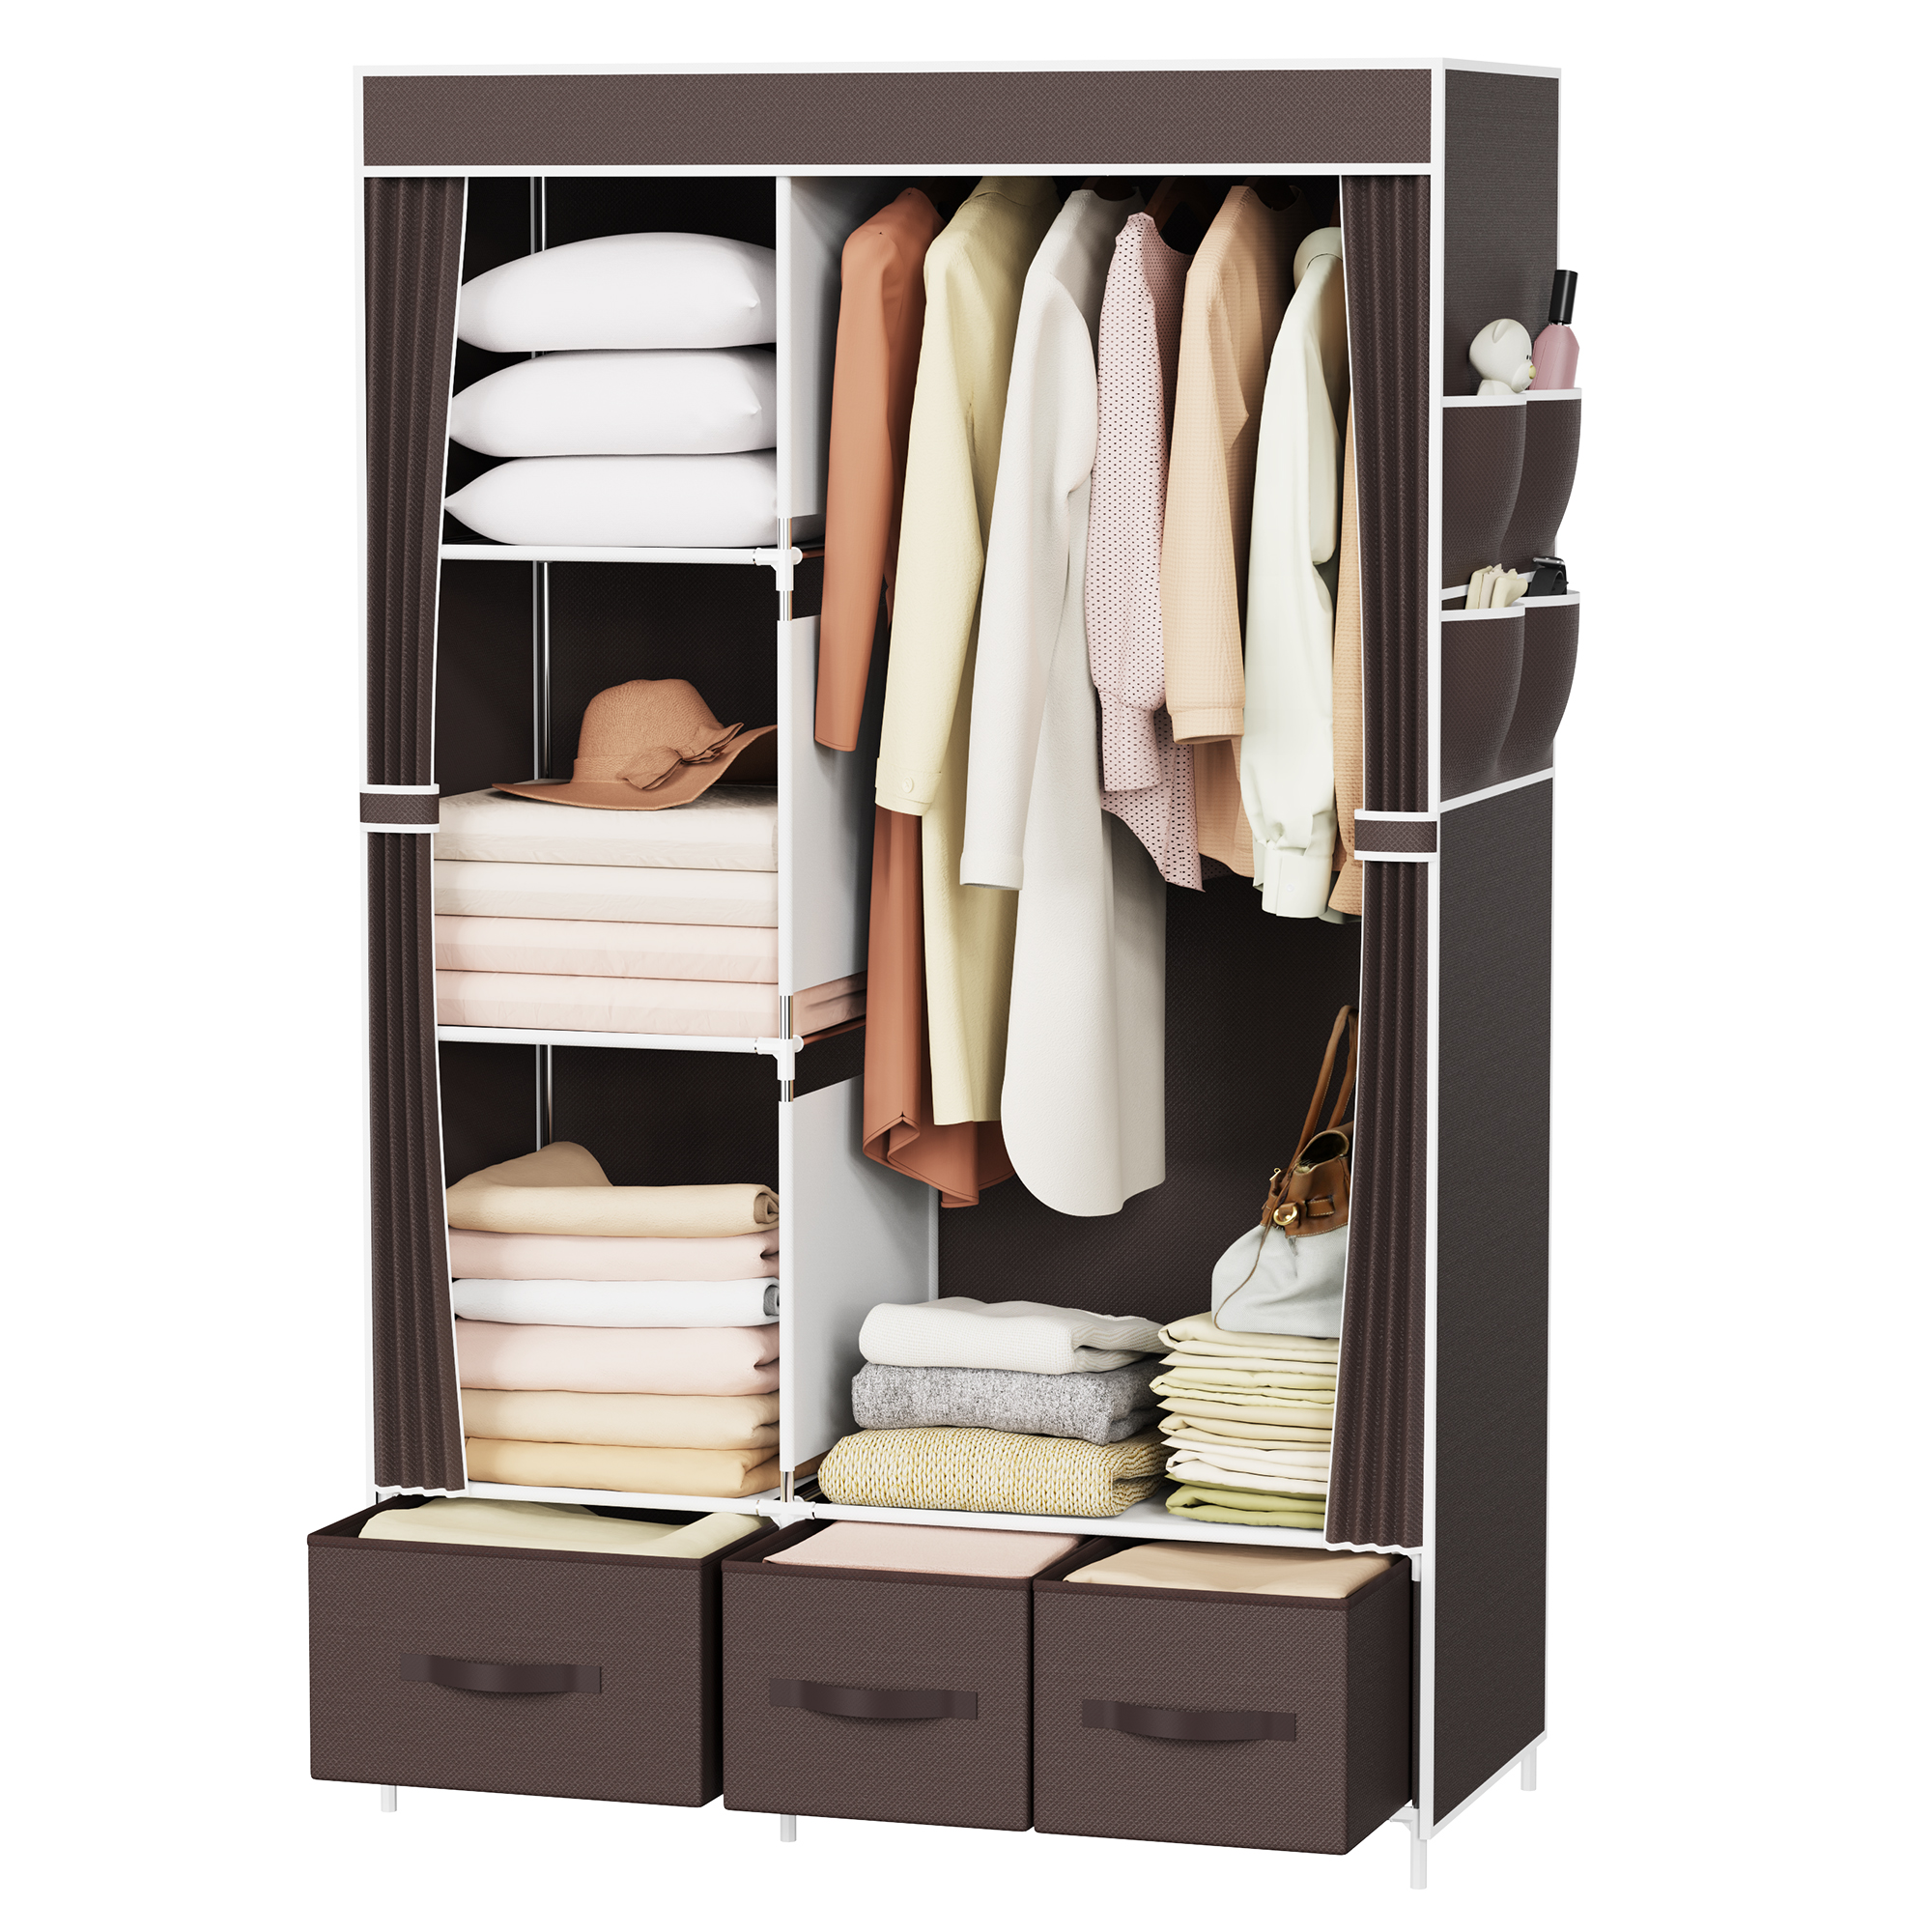 Riousery Portable Closets Wardrobe with Three Storage Boxes, Stable and Easy Assembly Clothes Rack for Hanging Clothes - image 1 of 7